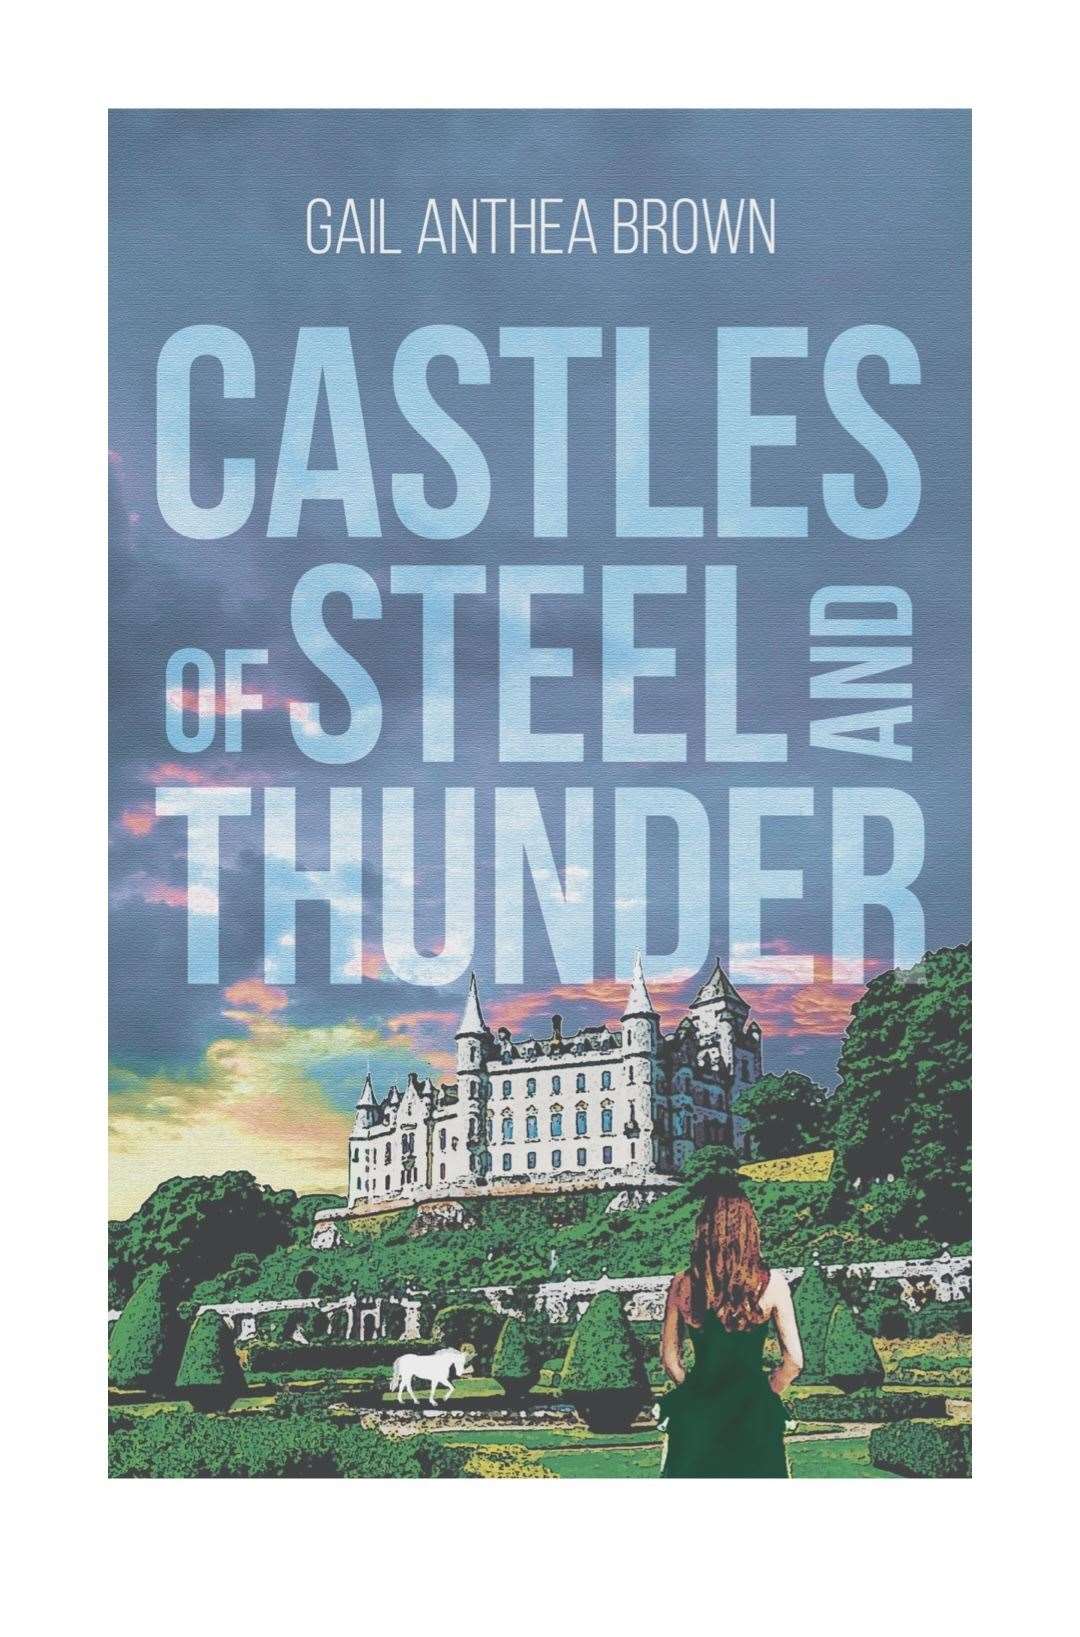 The cover of Gail's new book with a fantasy image of Dunrobin Castle.